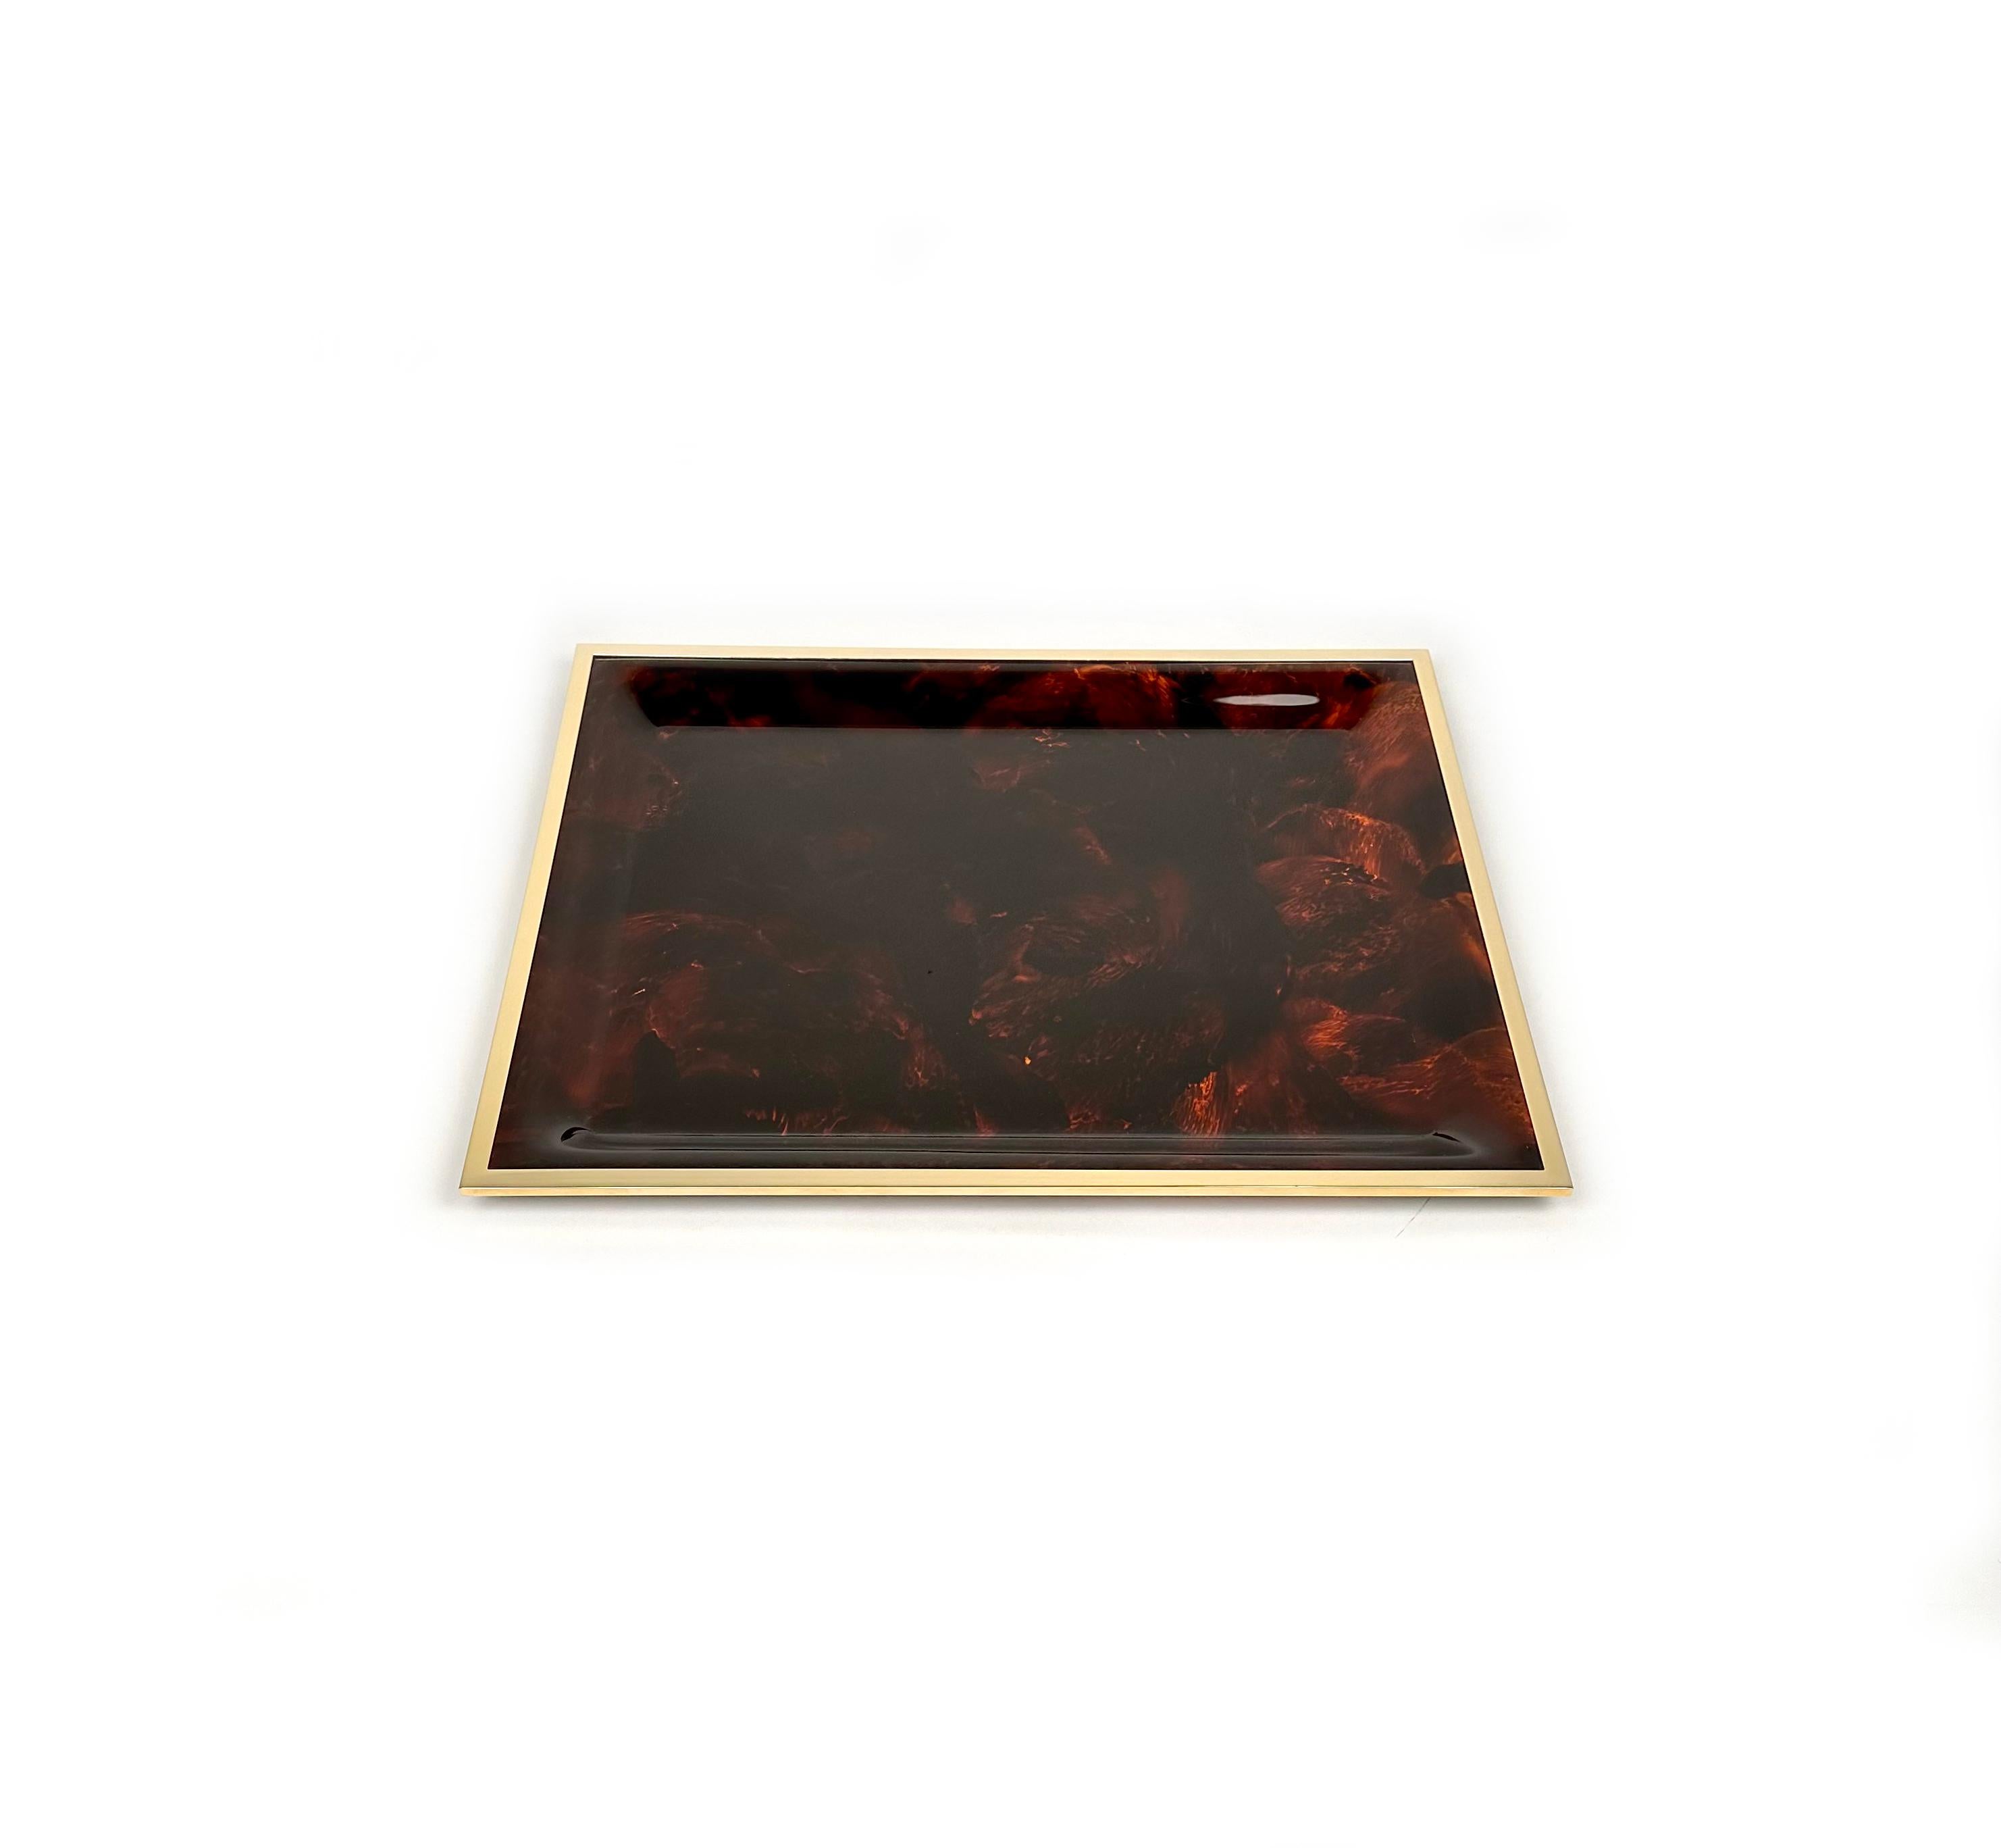 Mid-Century Modern Serving Tray in Tortoiseshell Lucite and Brass Christian Dior Style, Italy 1970s For Sale